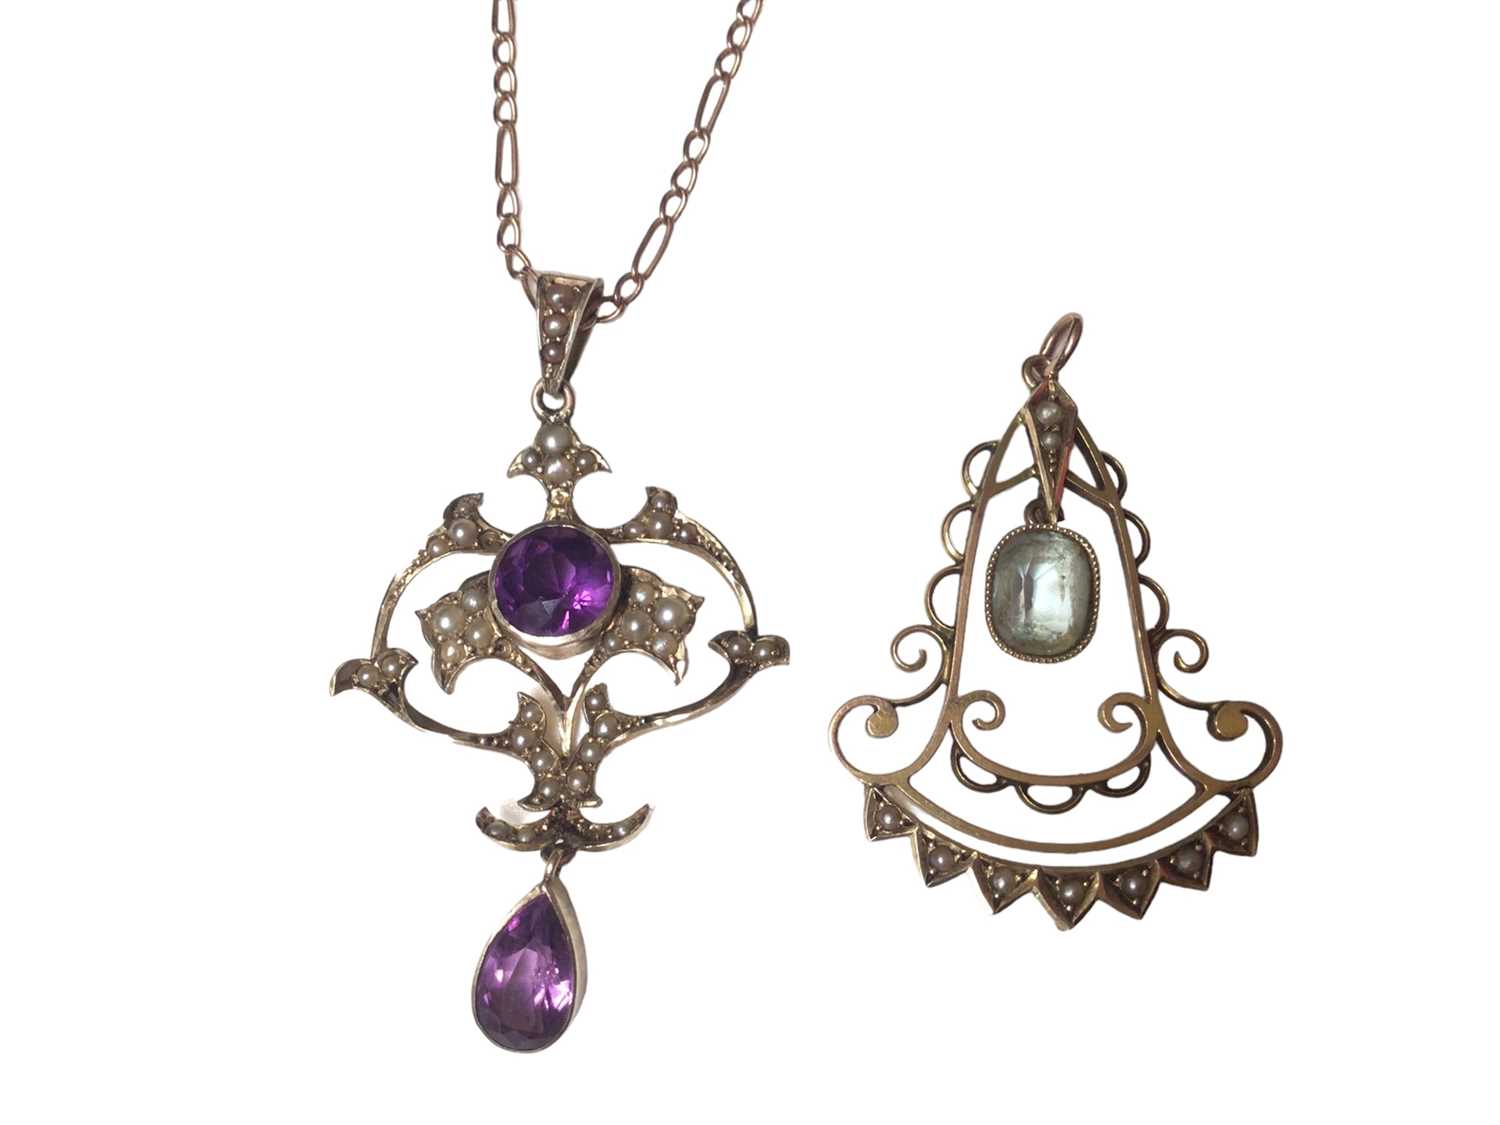 Edwardian gold amethyst and seed pearl pendant necklace on chain together with an Edwardian gold and